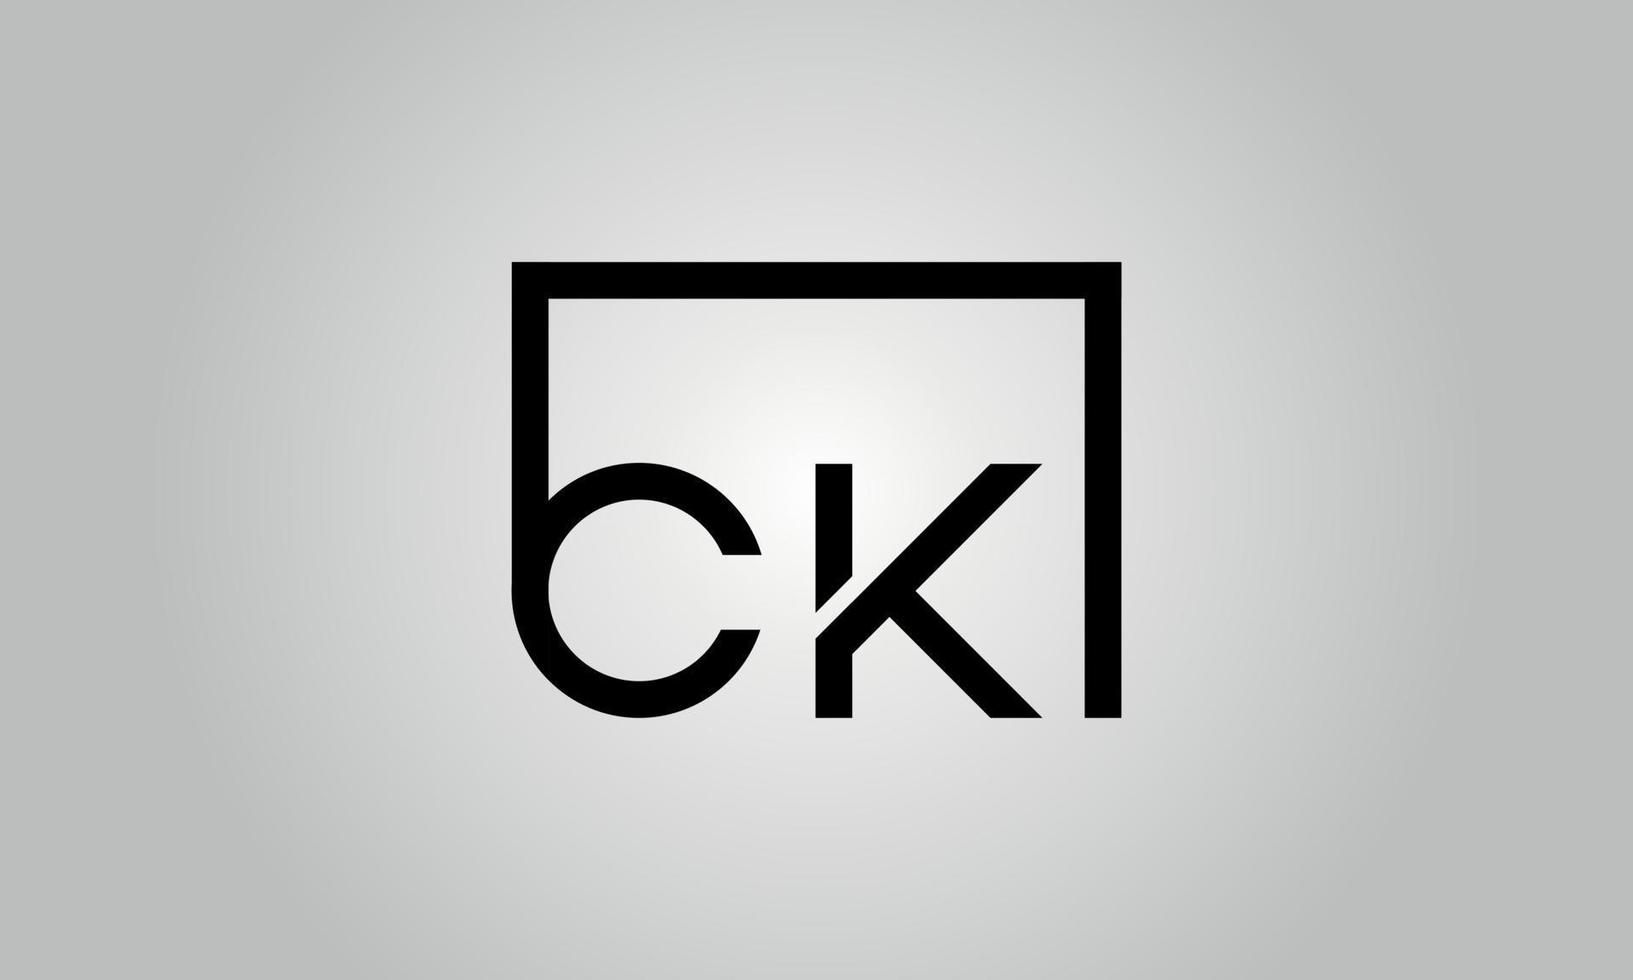 Letter CK logo design. CK logo with square shape in black colors vector free vector template.